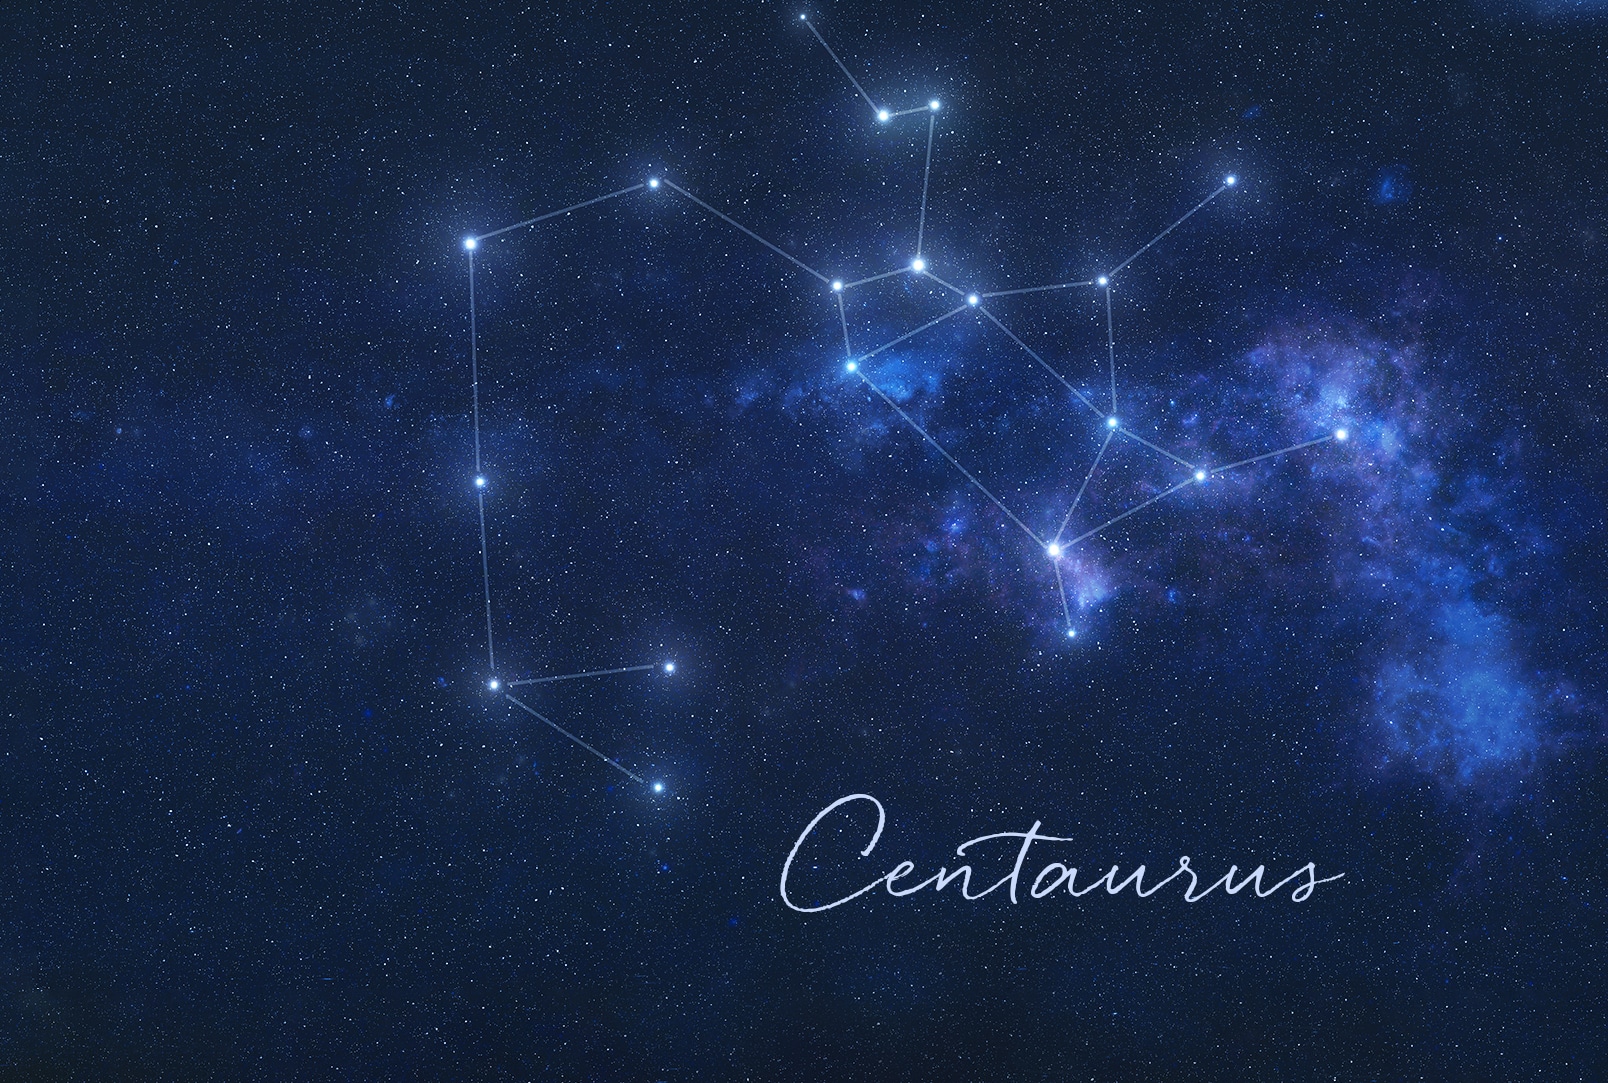 According to the poet Ovid, this constellation represents Chiron, the wisest of all centaur swho mentored Greek heroes including Jason, Hercules, and Achilles. (Others associate Chiron with the Sagittarius constellation.)